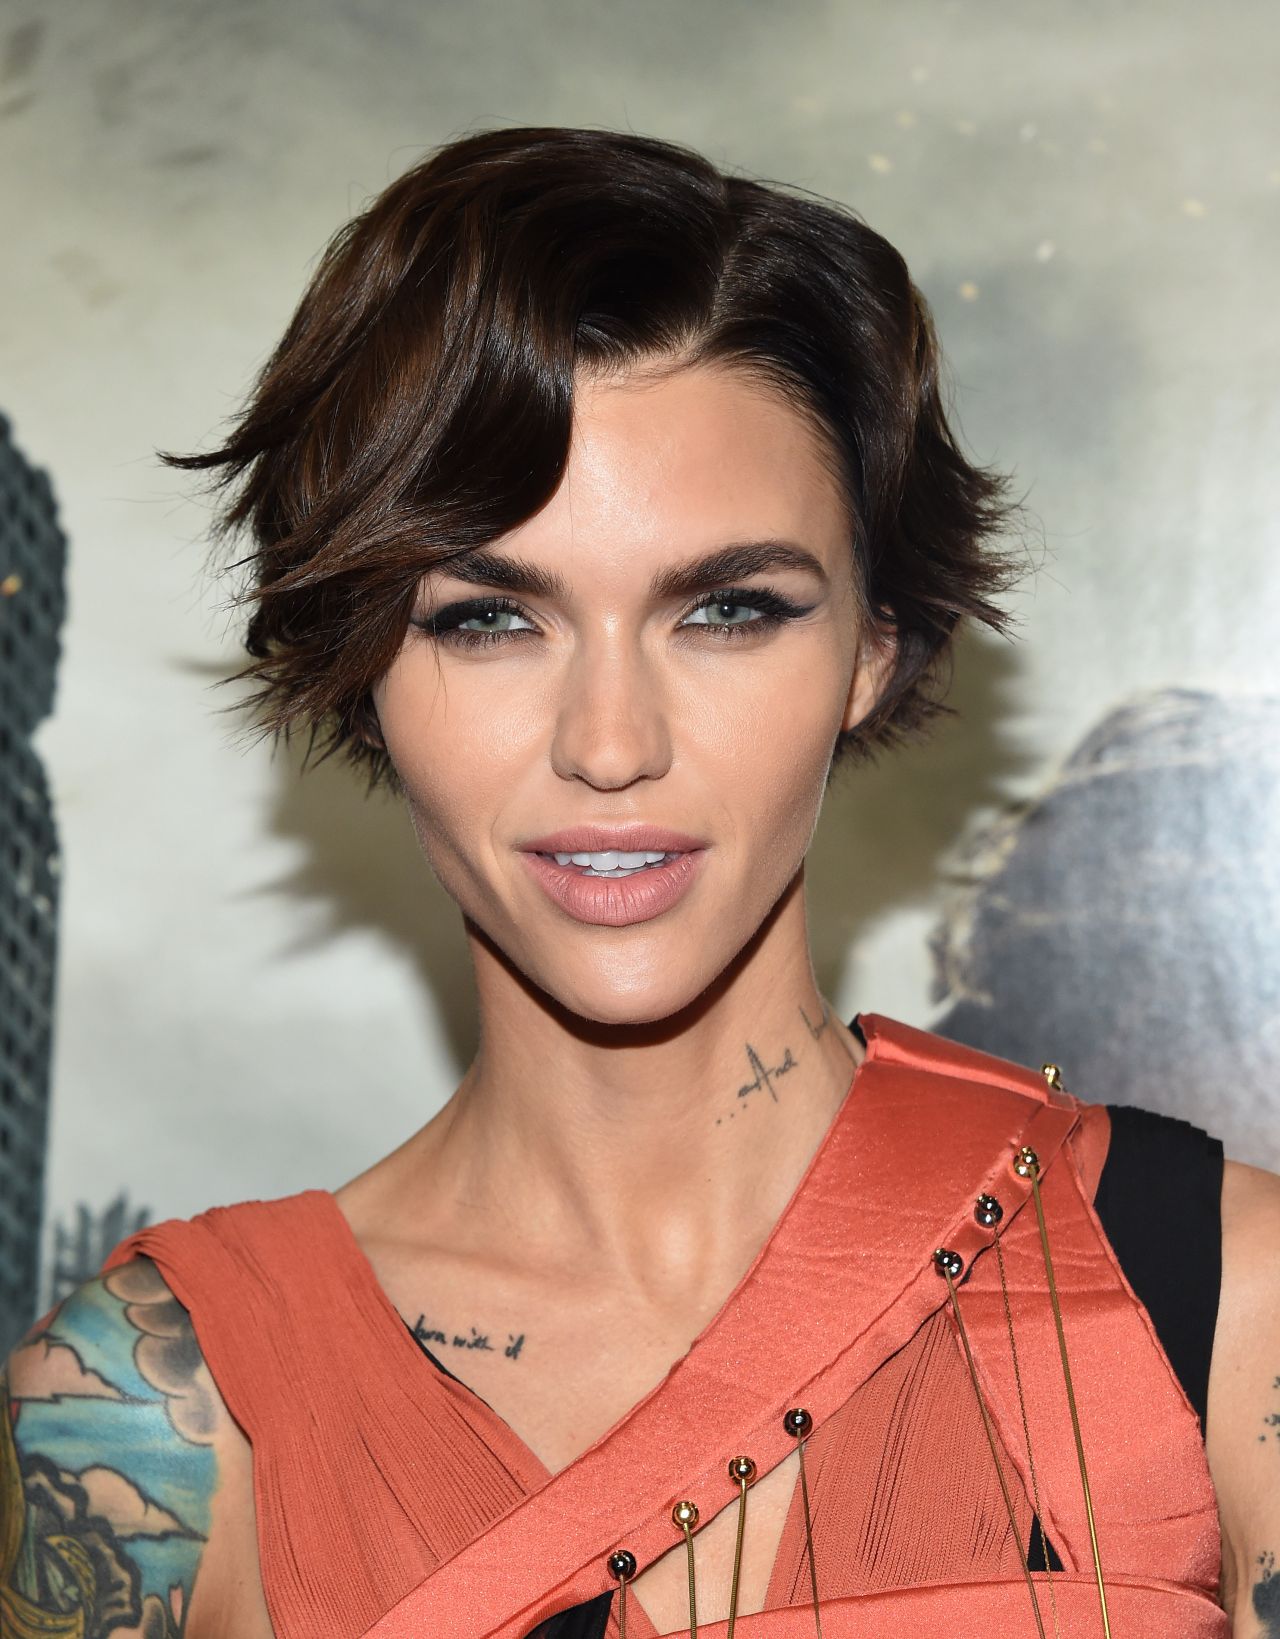 Ruby Rose - Resident Evil: The Final Chapter Premiere in 